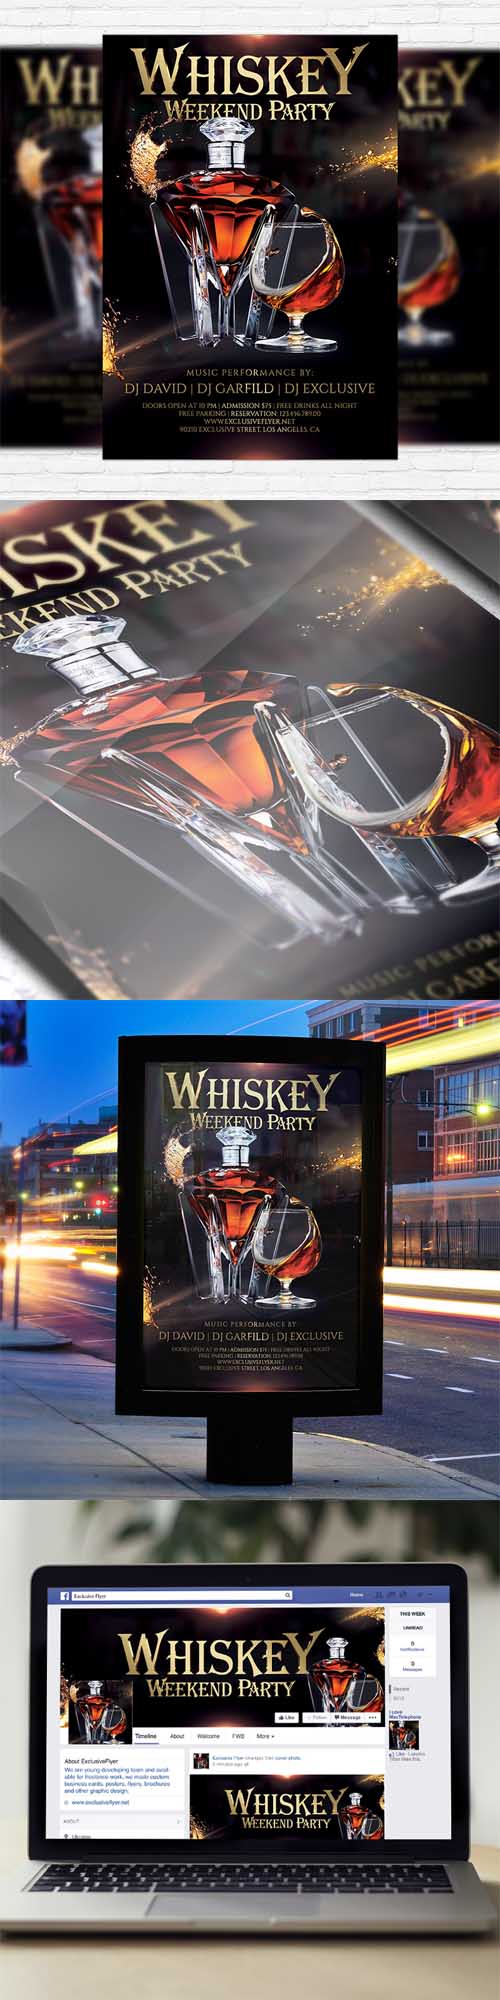 Flyer Template - Whiskey Weekend Party + Facebook Cover